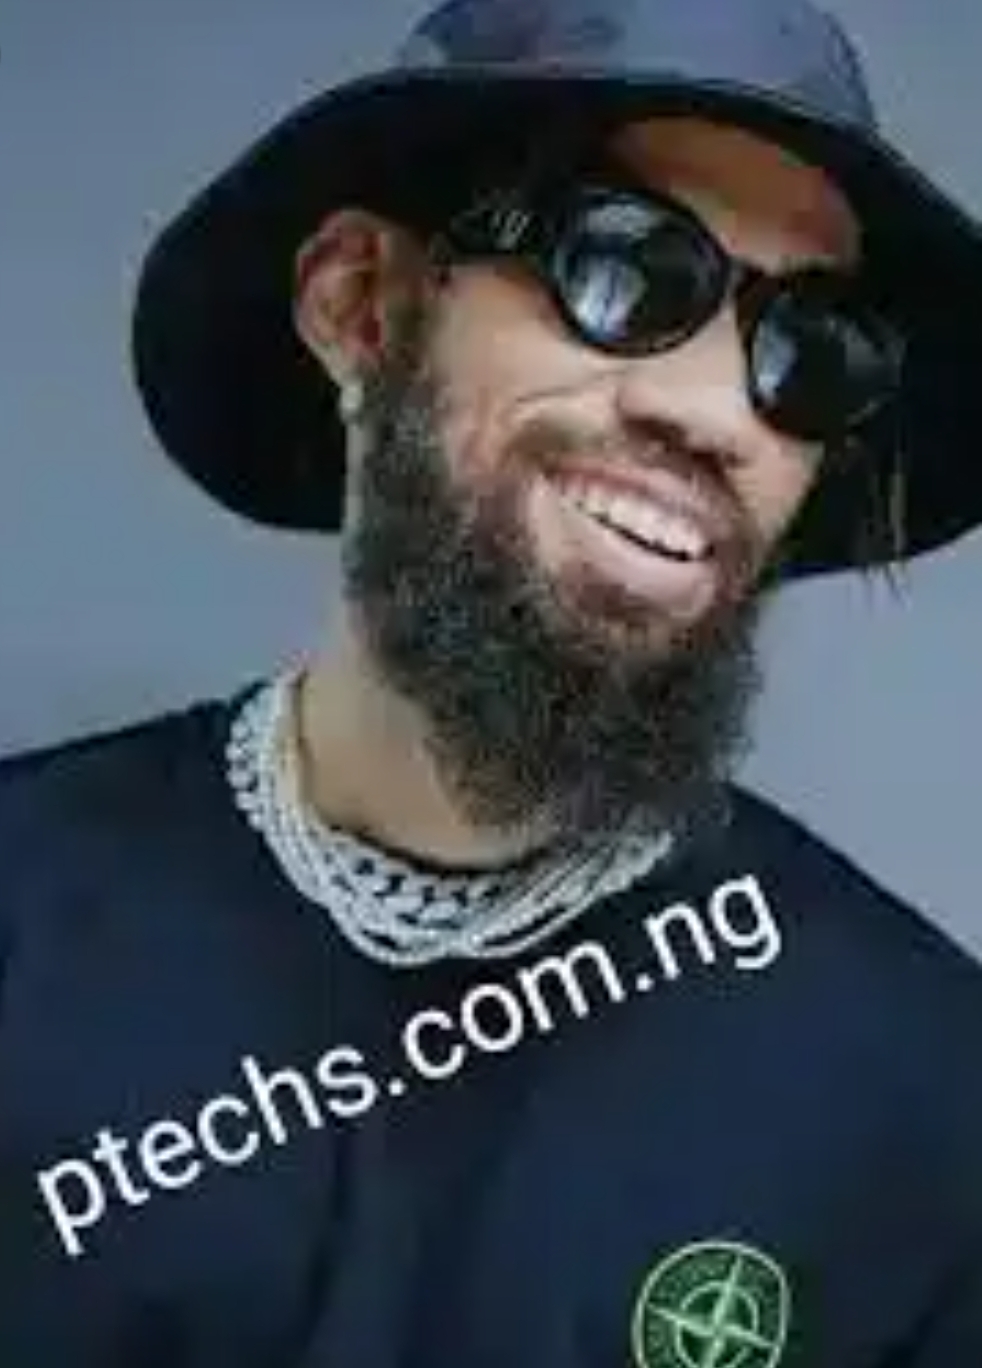 Phyno Phone Number And Phyno Whatsapp Number